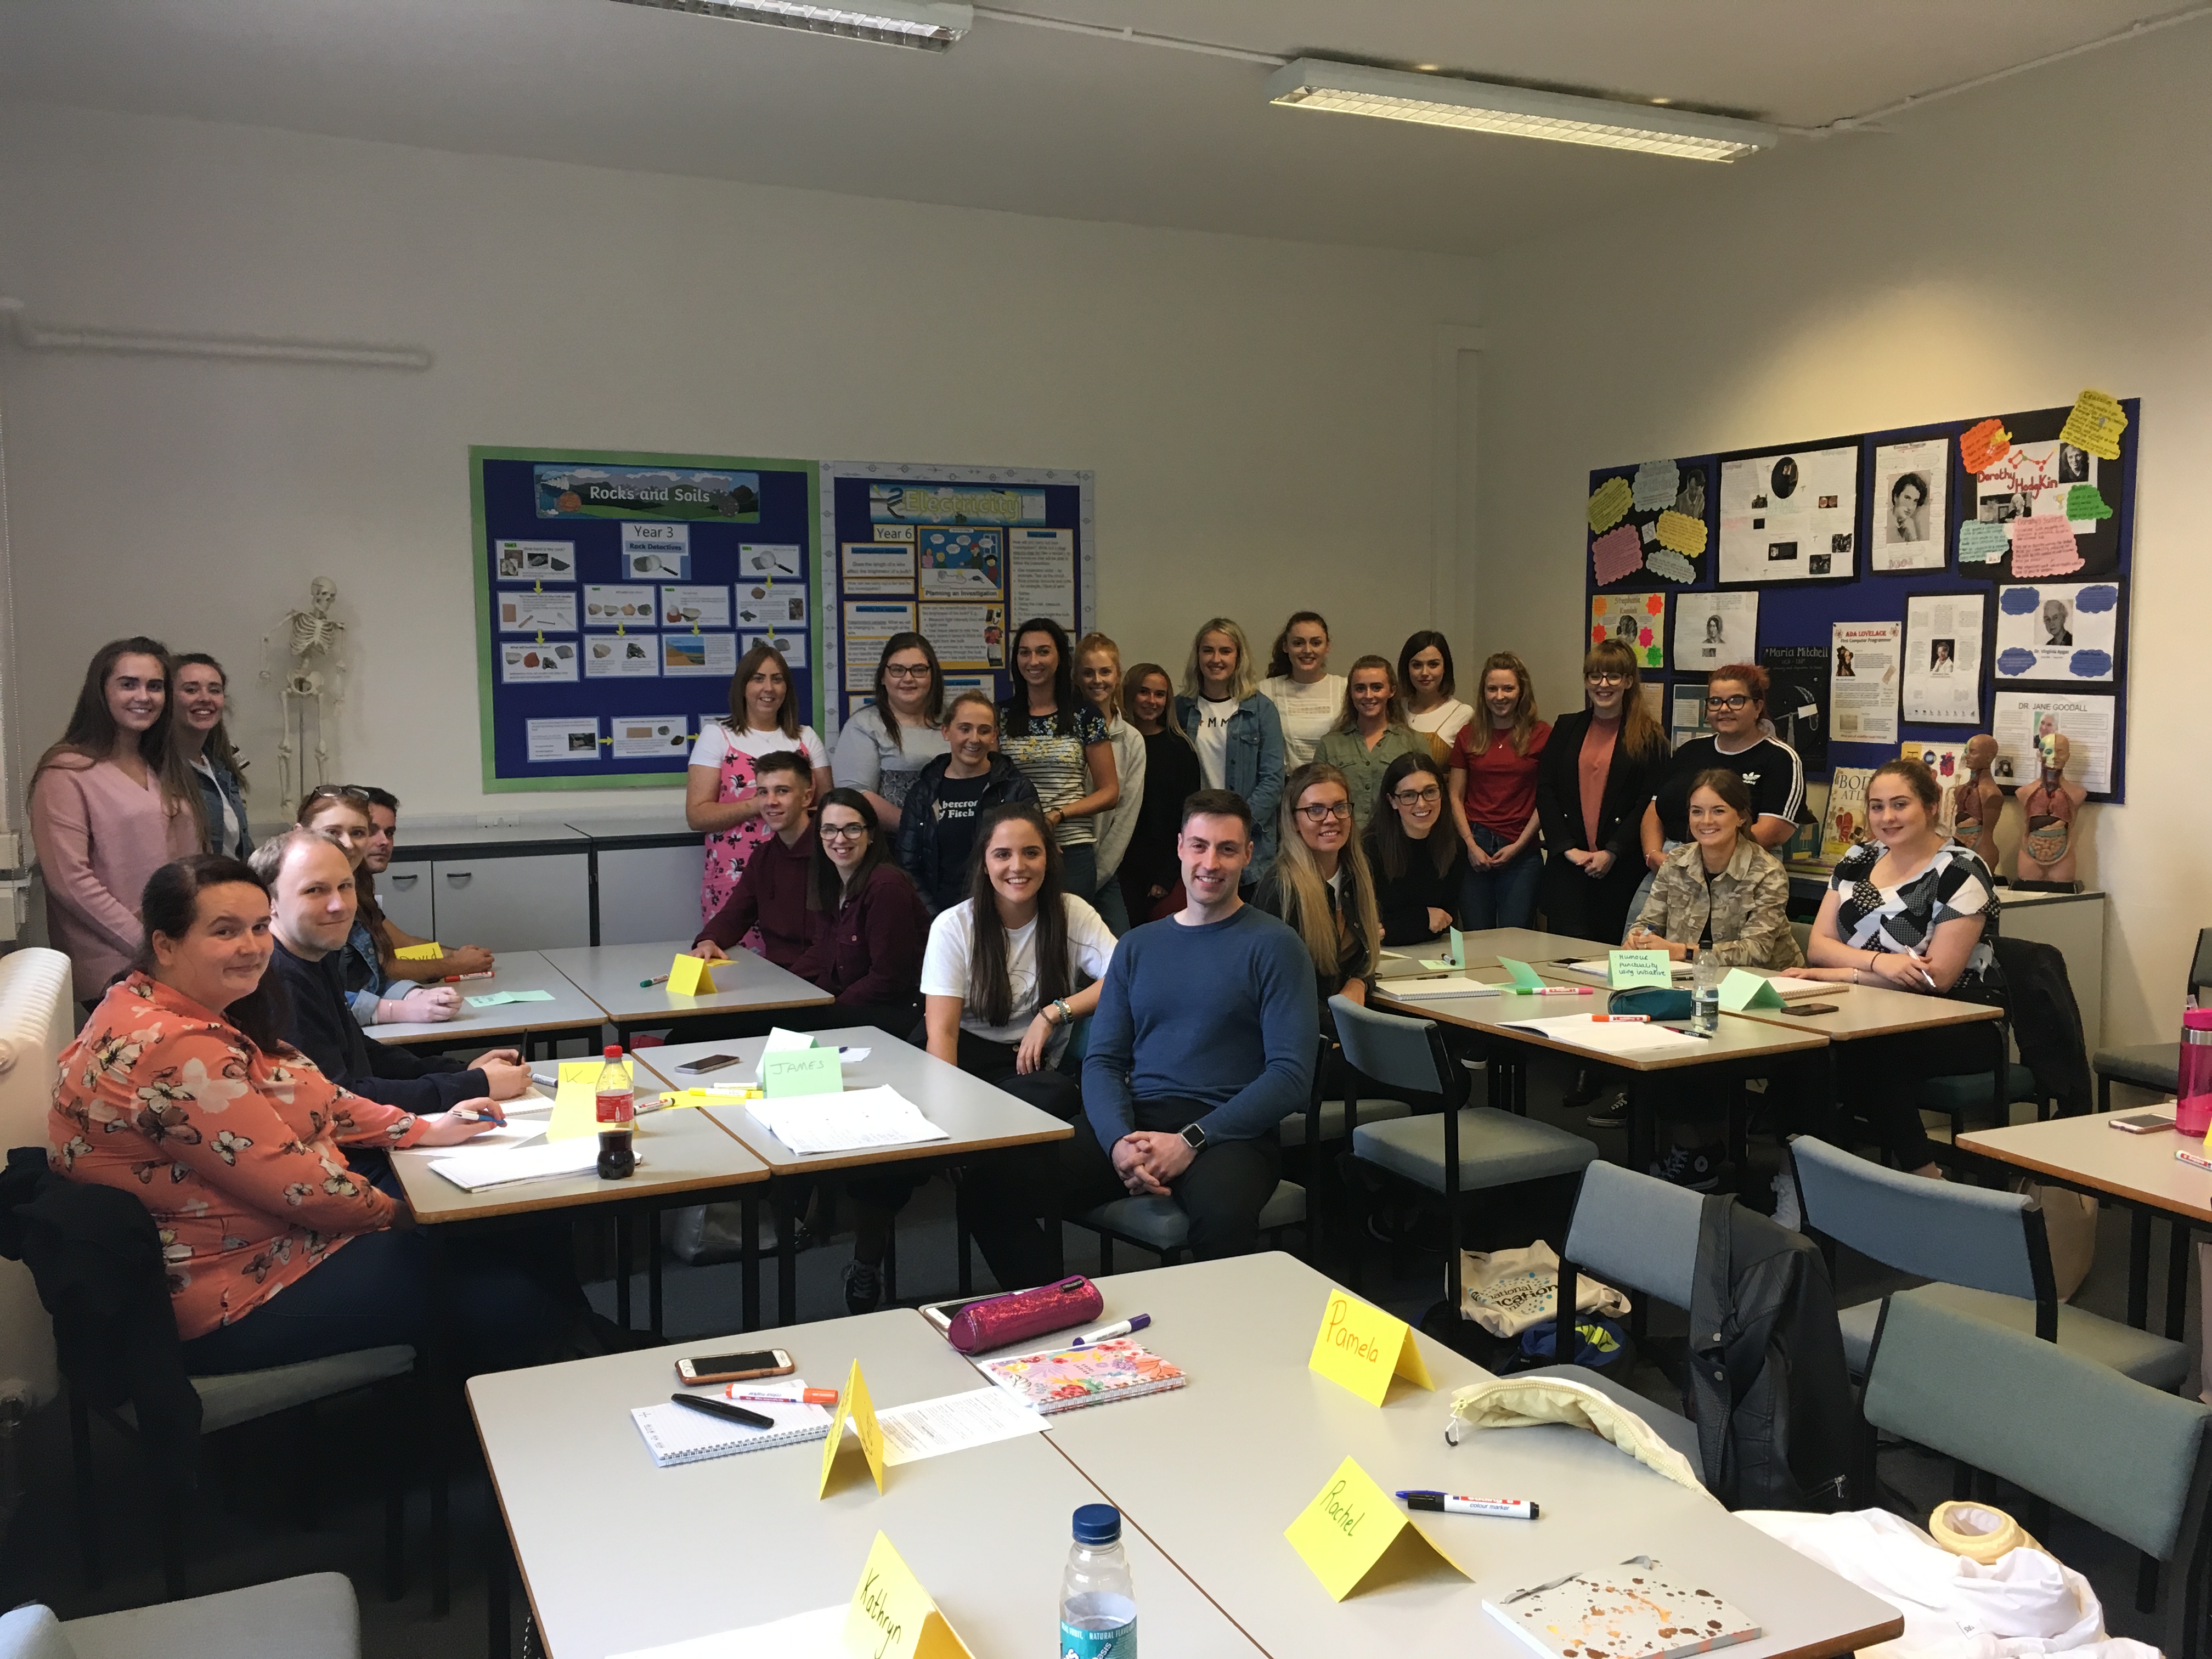 PGCE teacher training students on their first day on campus - Sep 2019